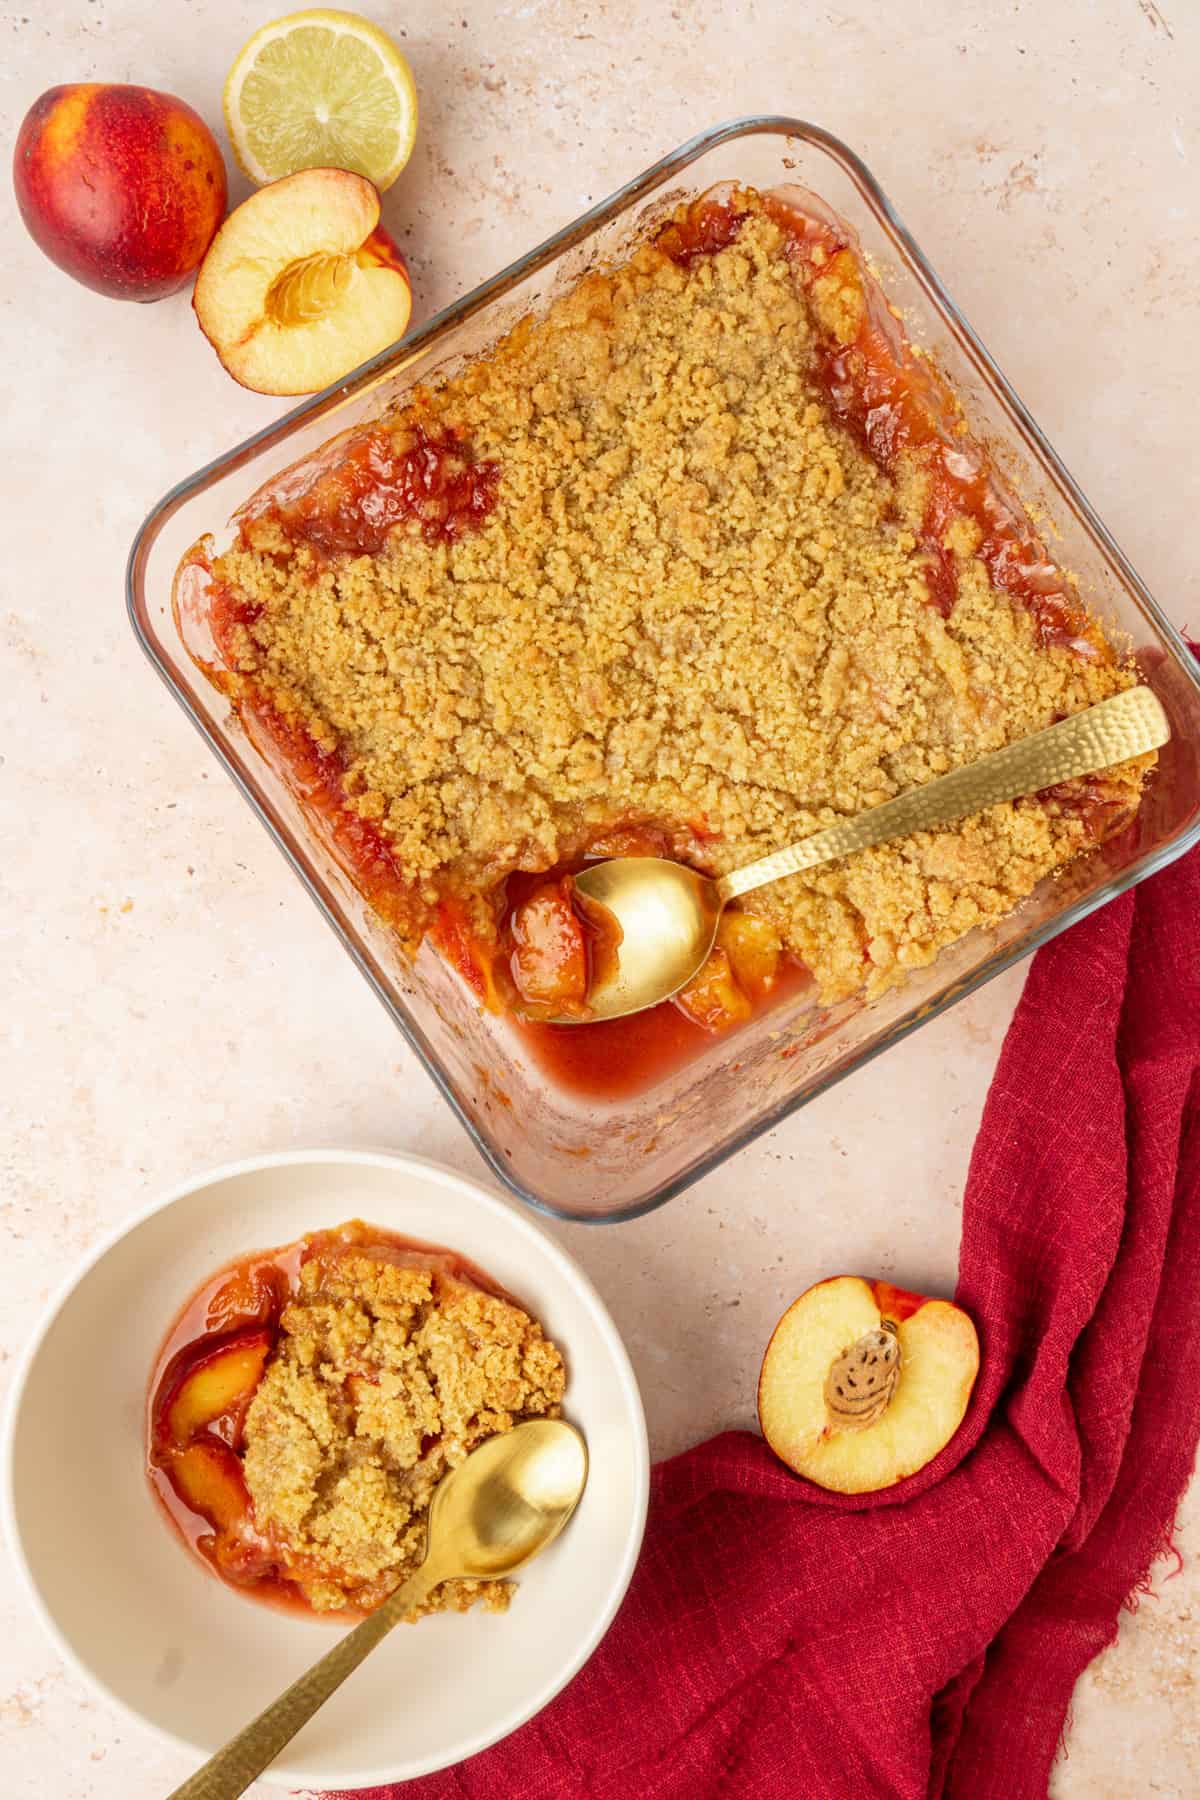 A peach crumble in a baking dish and a portion in a bowl.